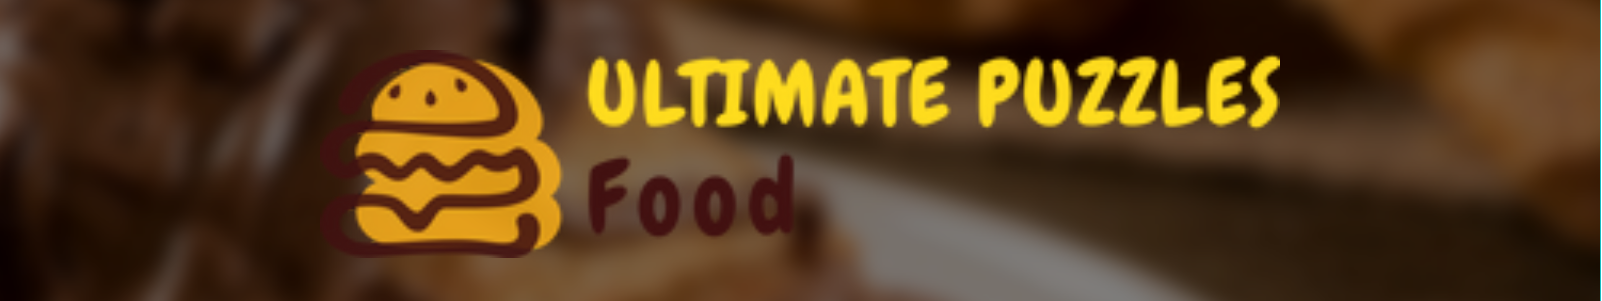 Ultimate Puzzles Food